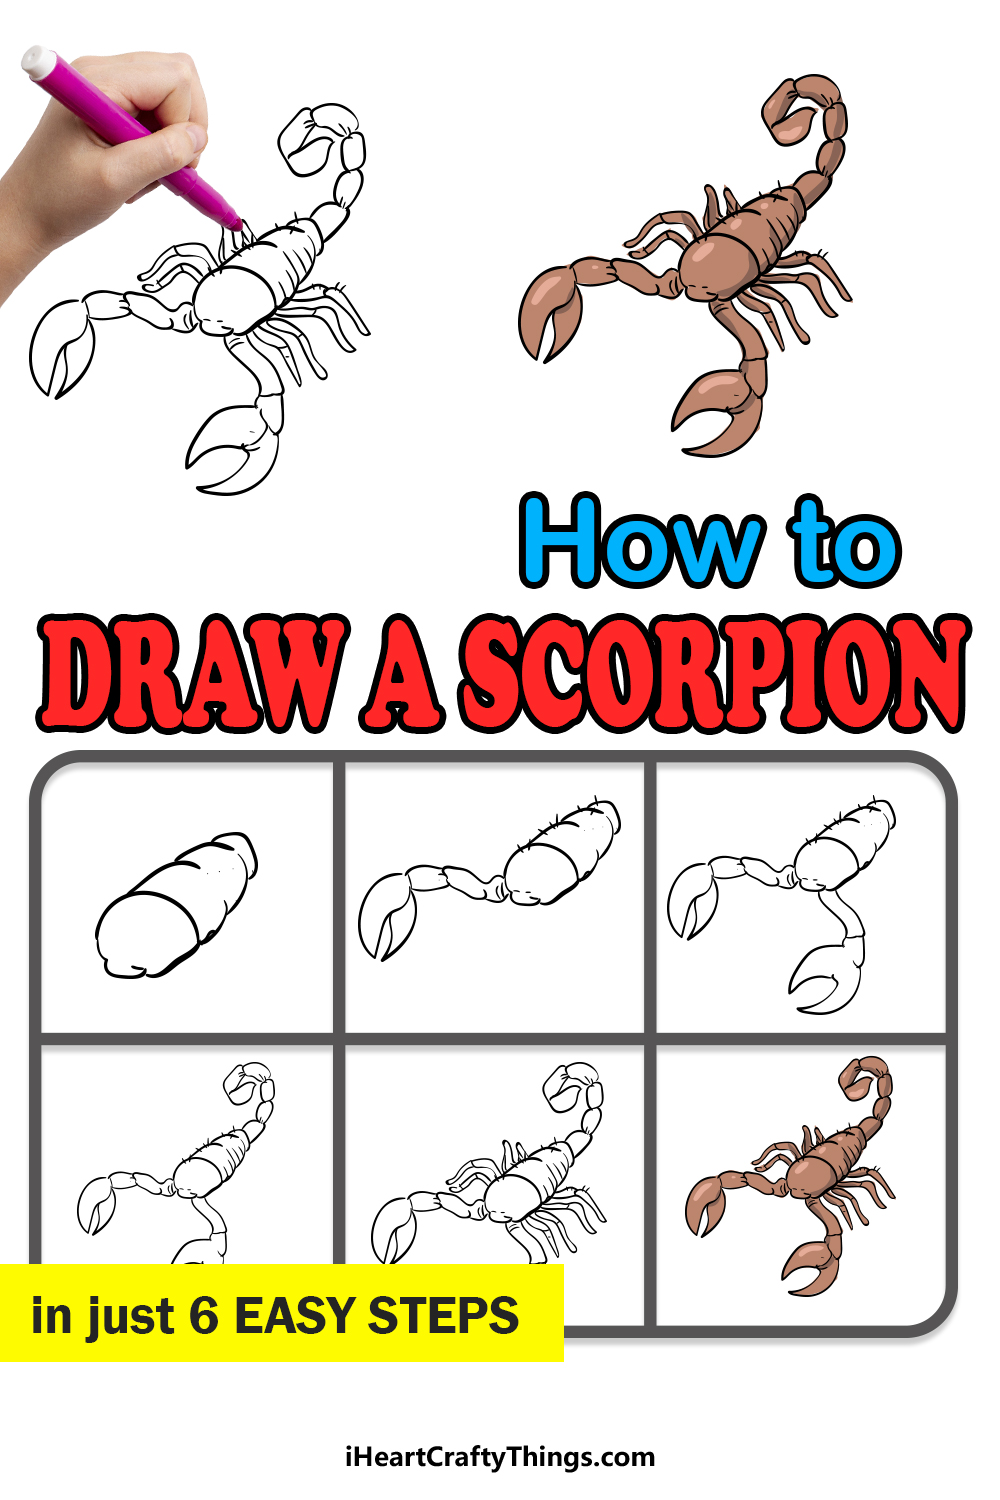 how to draw a scorpion in 6 easy steps